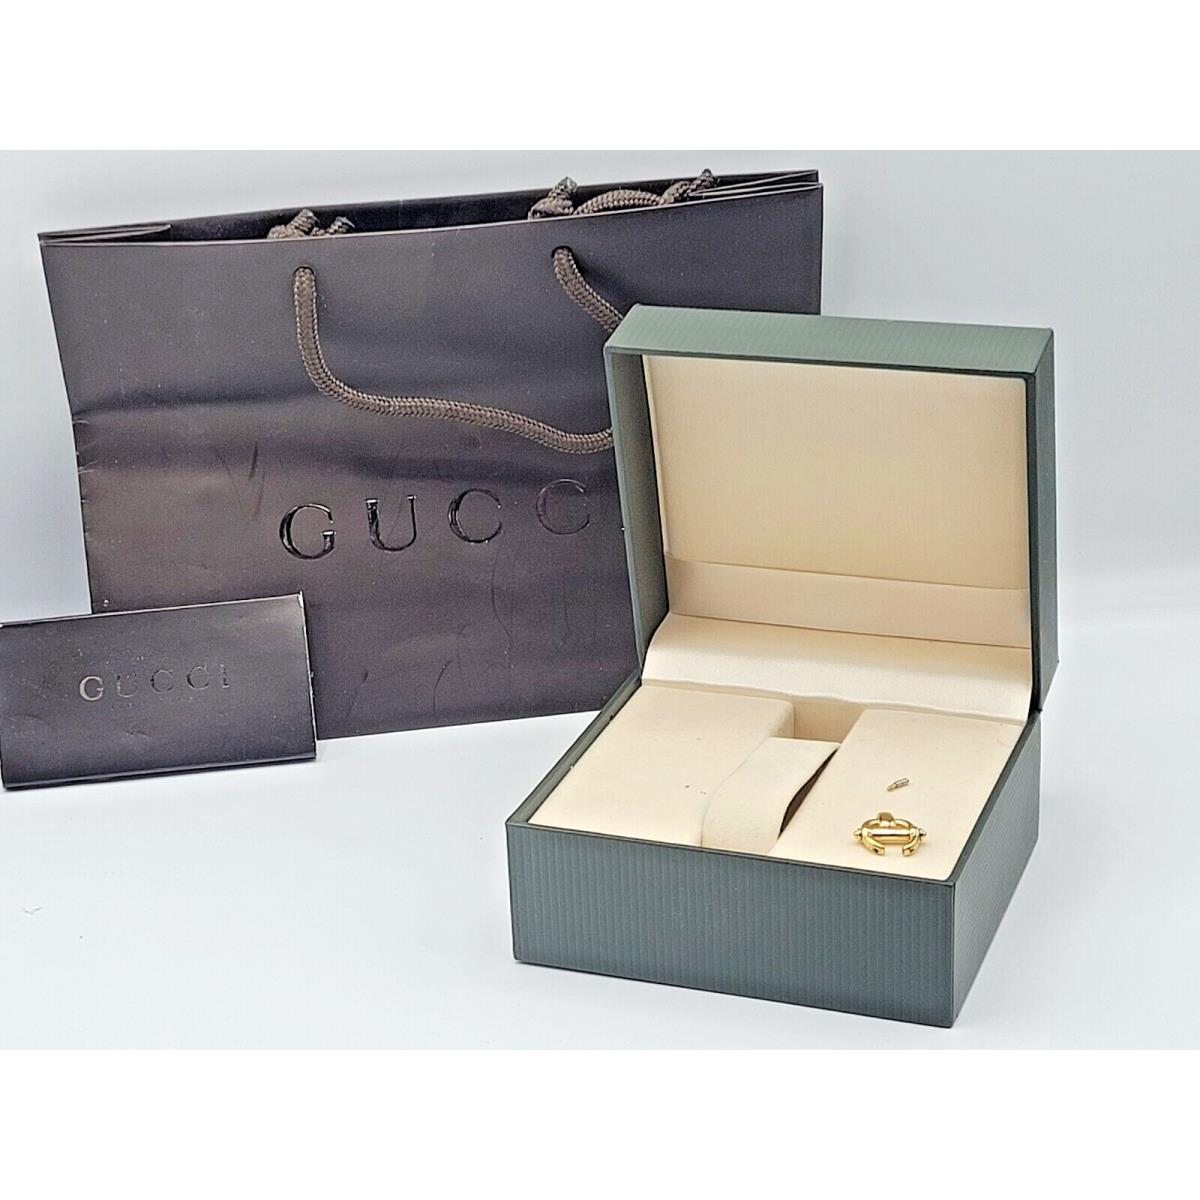 Gucci Watch Case Box Empty Guarantee Card and Parts